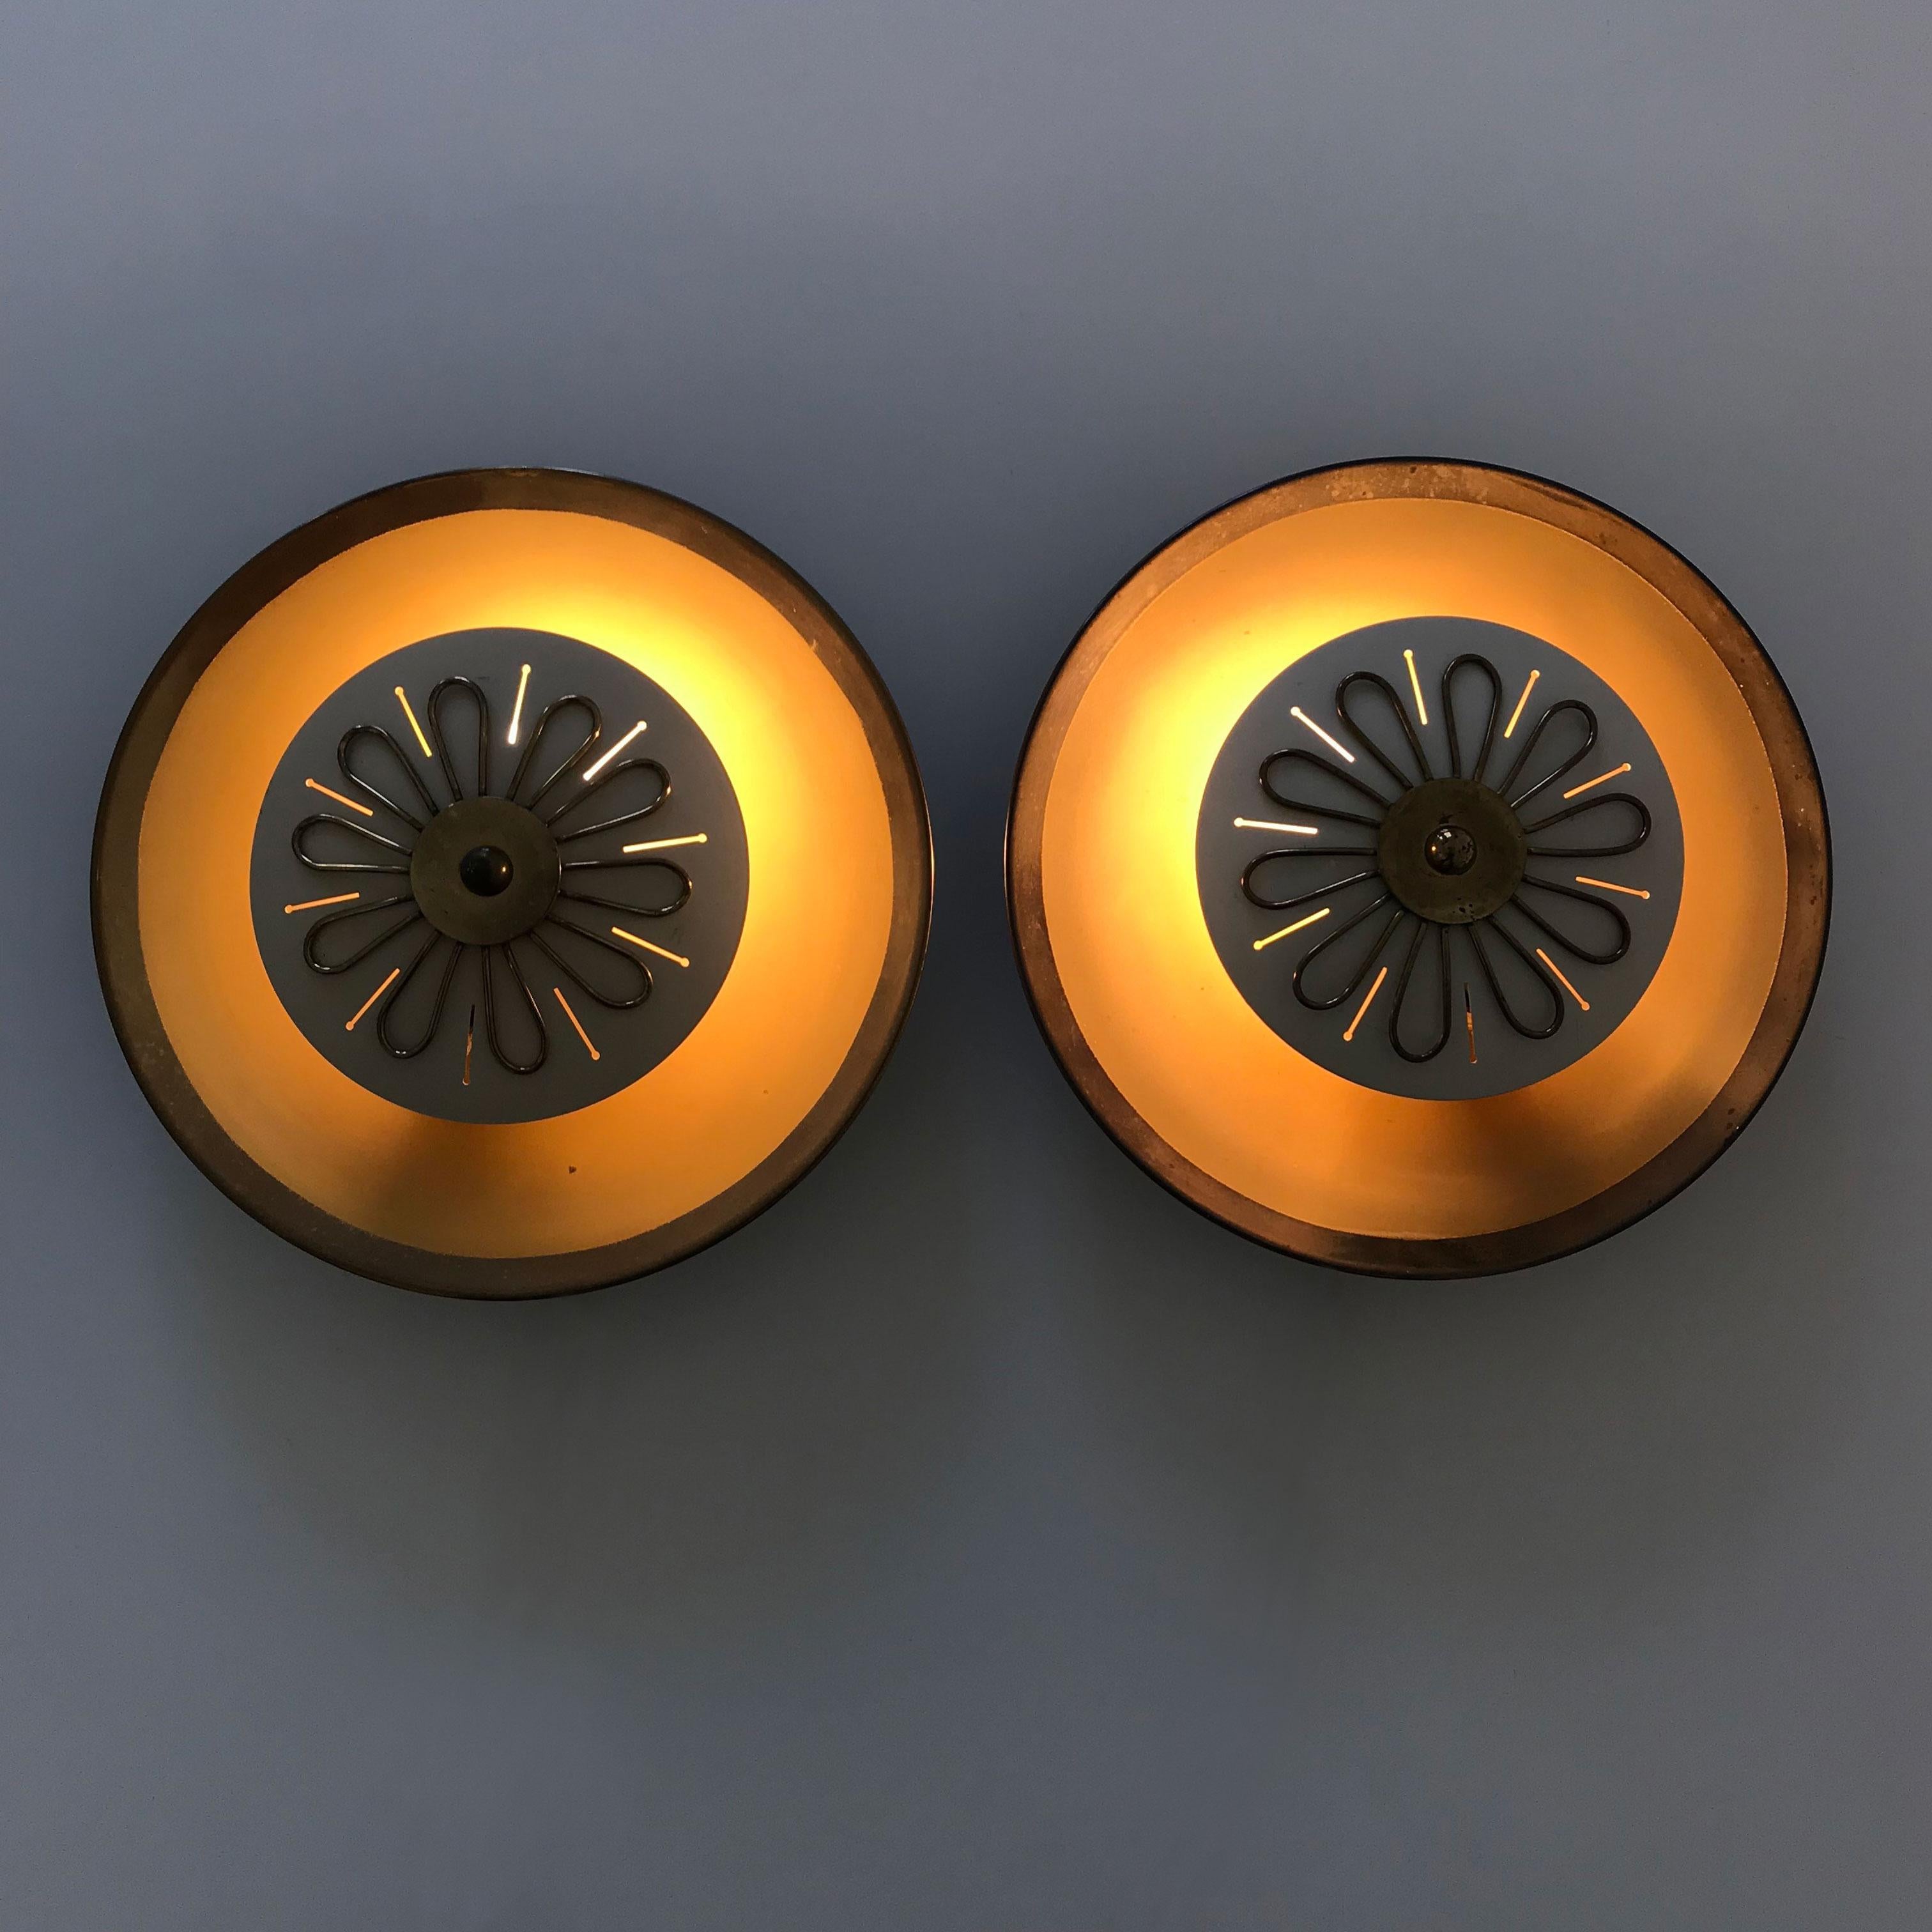 Set of two extremely rare and lovely Mid-Century Modern wall lamps or flush mounts. Manufactured probably by Wila, 1950s, Germany.

The lamps are executed in brass and each needs 1 x E14 Edison screw fit bulb. They are wired, in working condition